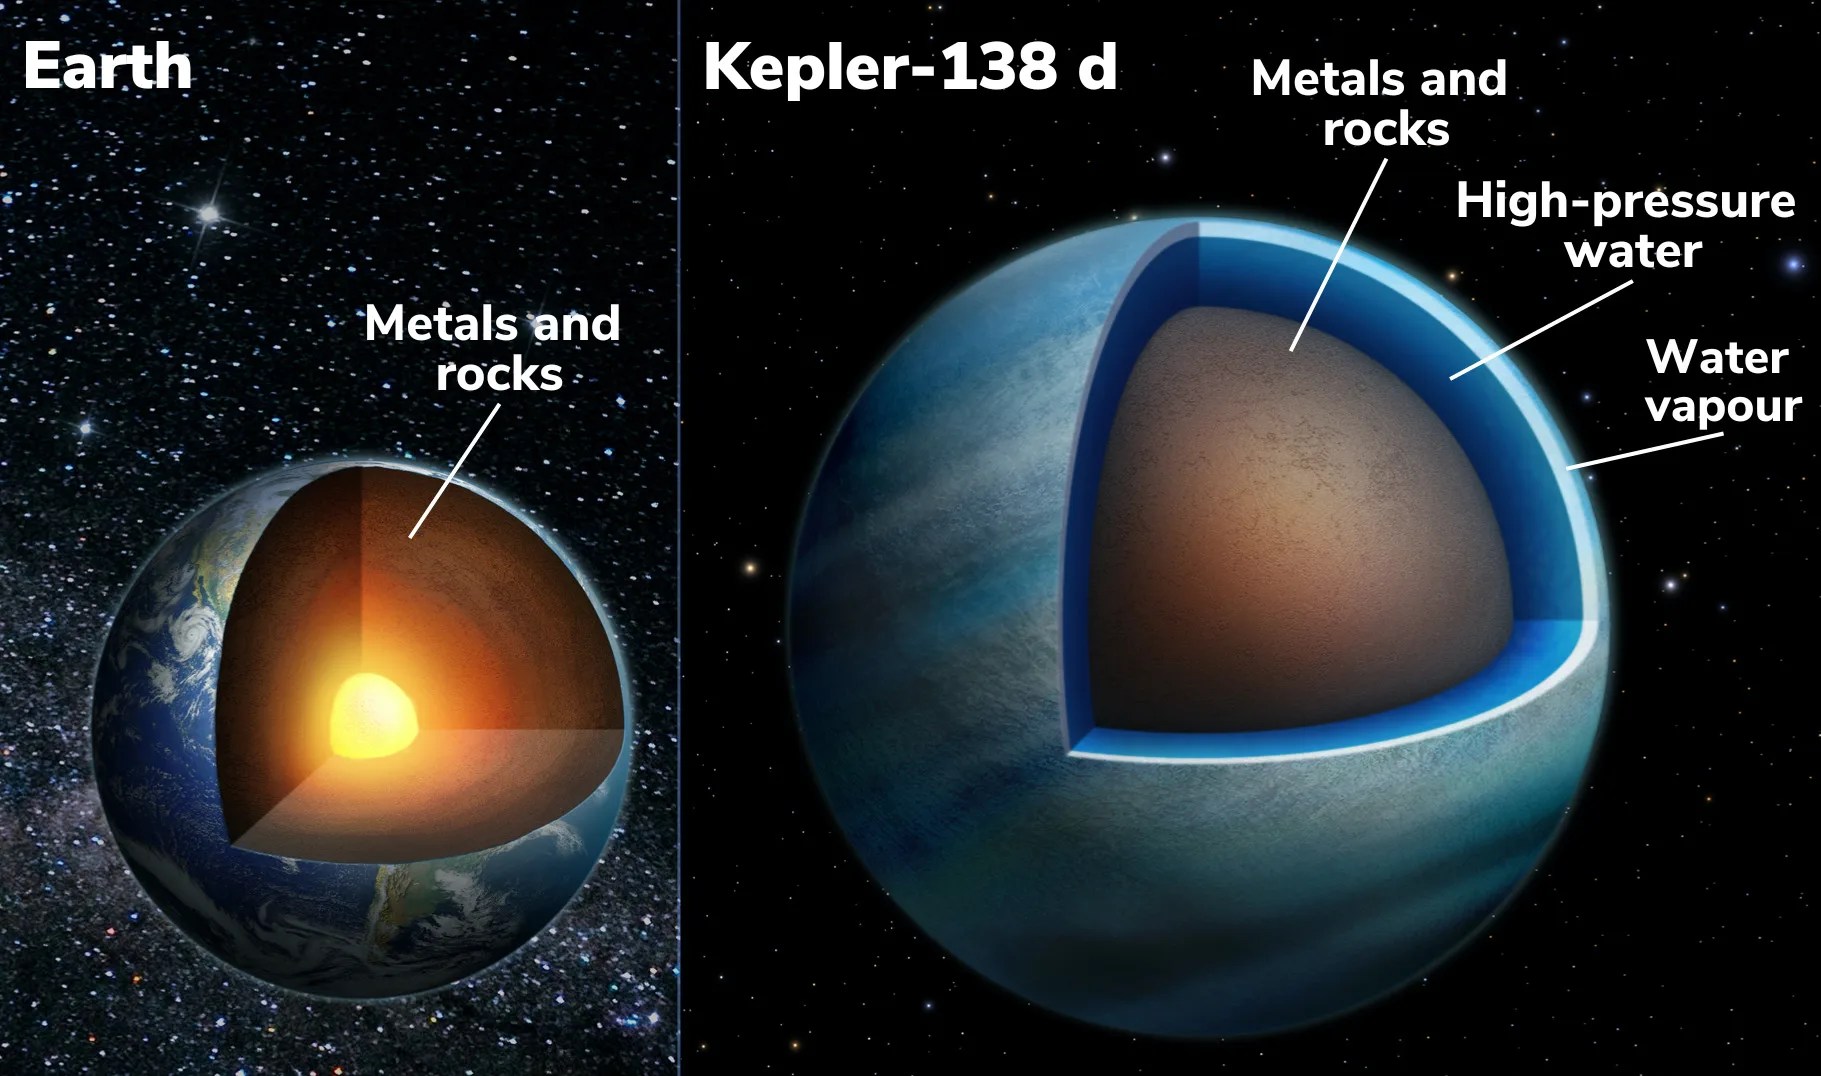 Left: a cross section of Earth showing its interior. Right: a cross section of the blue world, Kepler-138 d with a brown core (rocks & metal) below a dark blue high-pressure water layer that is below a light blue water vapor envelope..